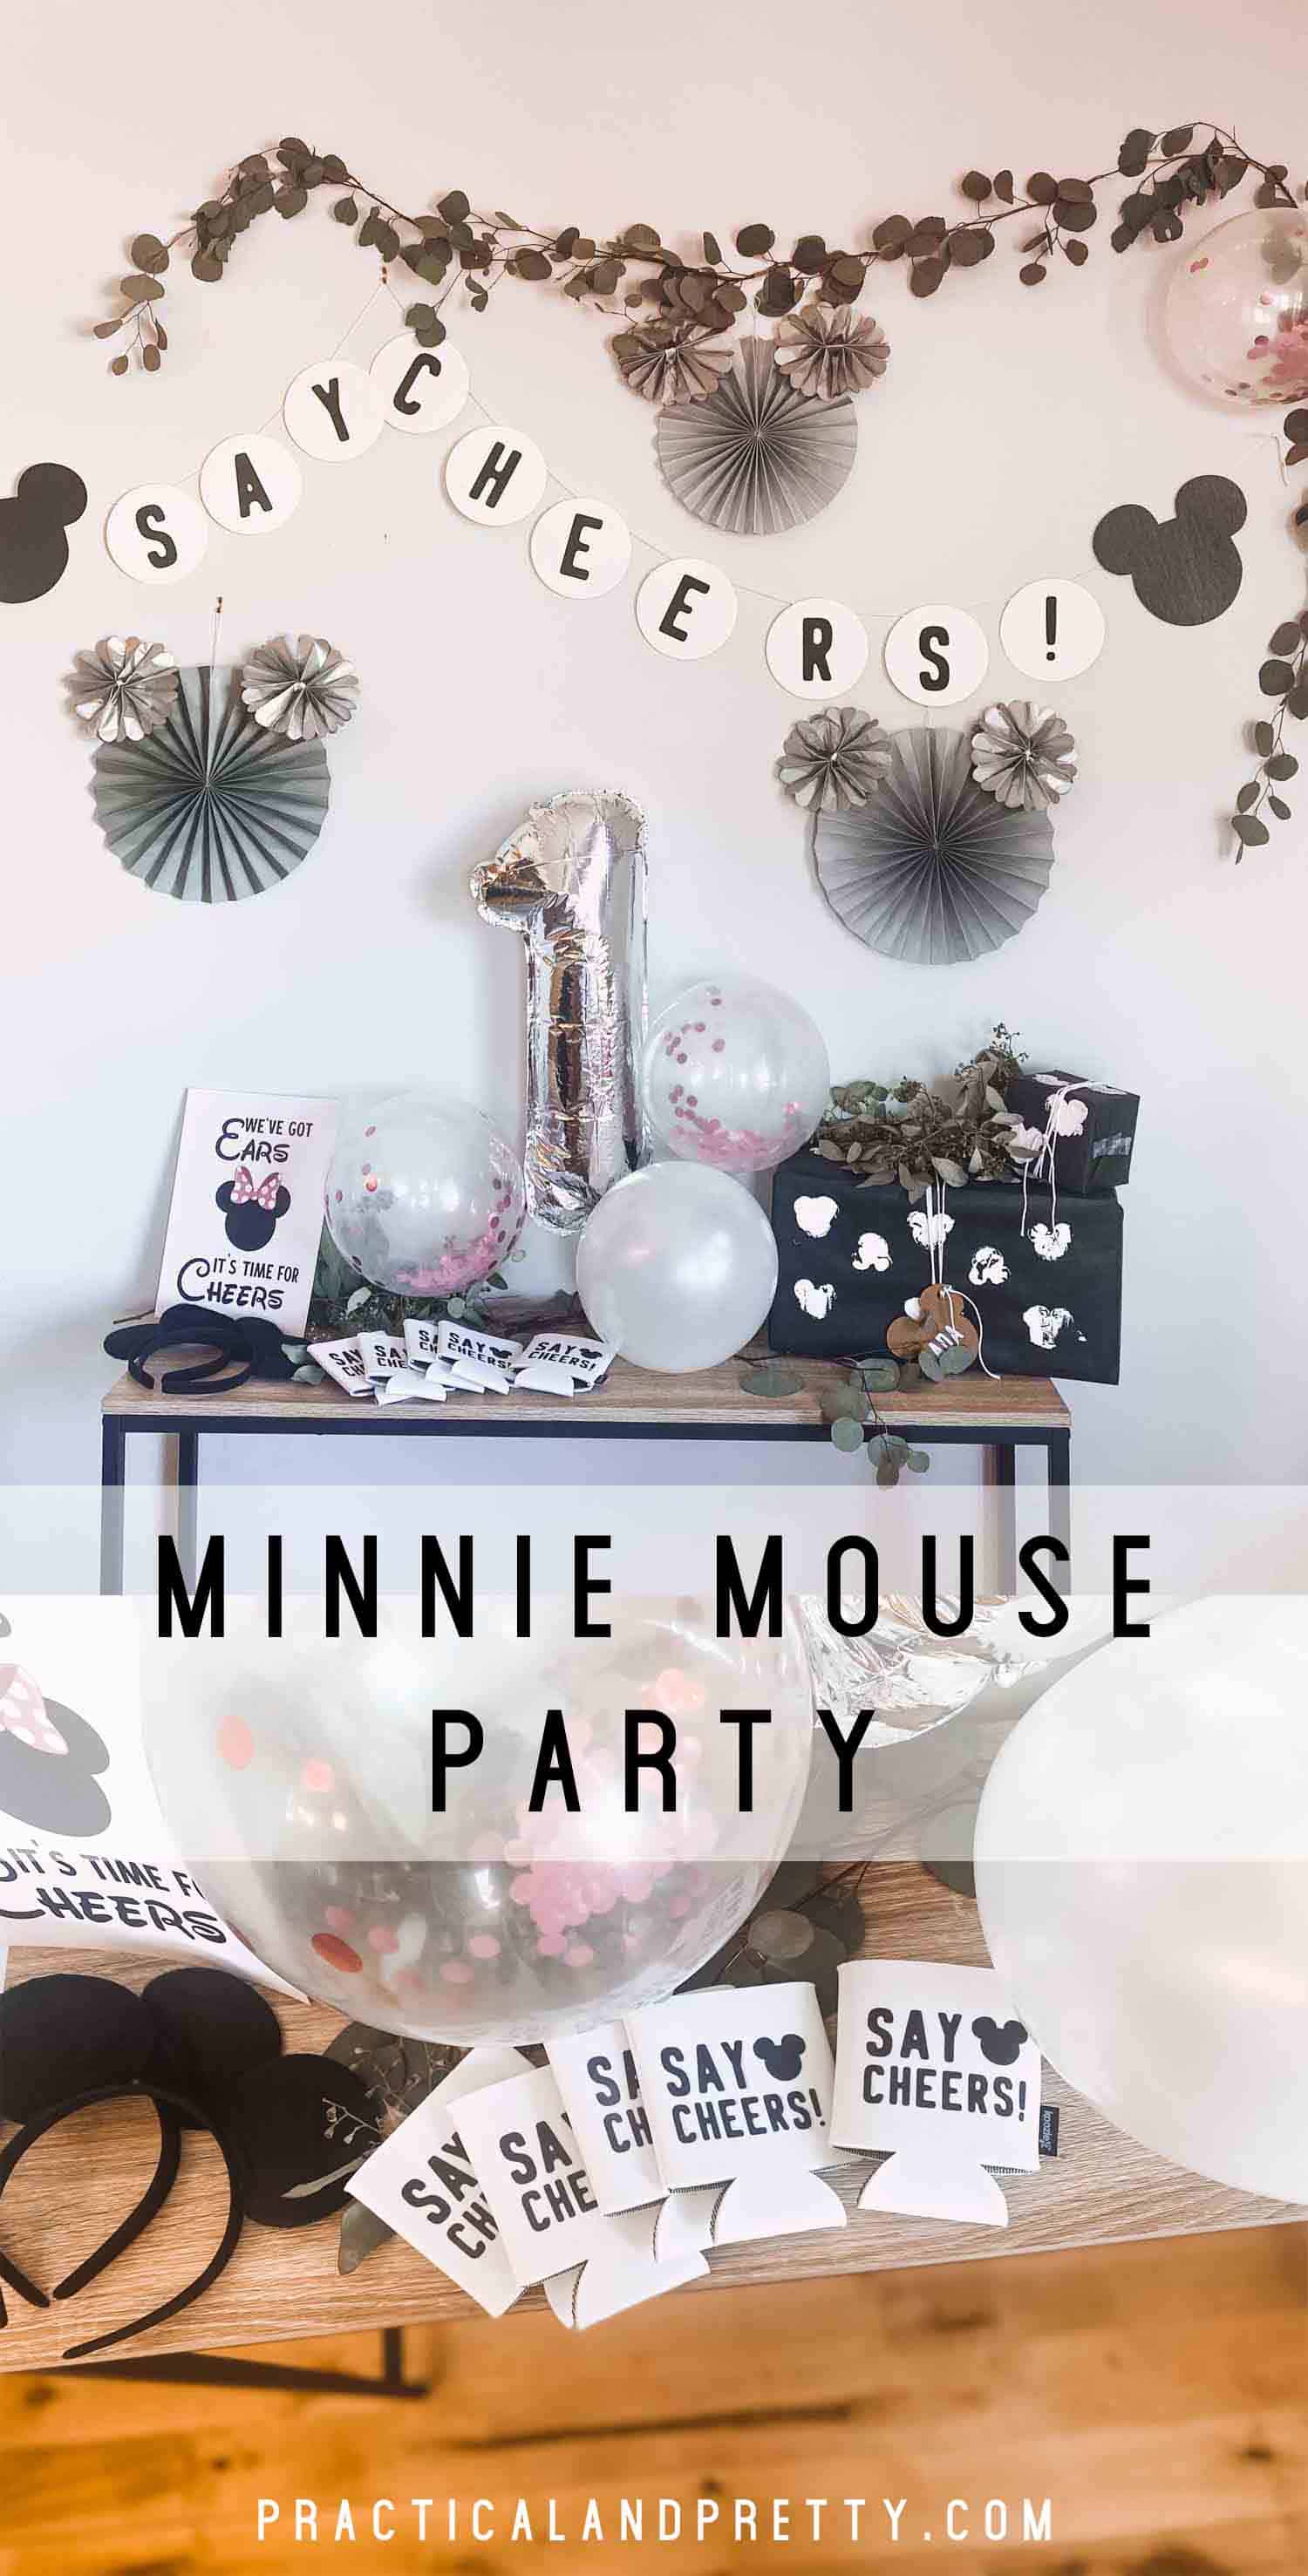 You can DIY an adorable Minnie Mouse party by yourself full of bows and Hot Diggity Dogs. You will also find some free printables here!